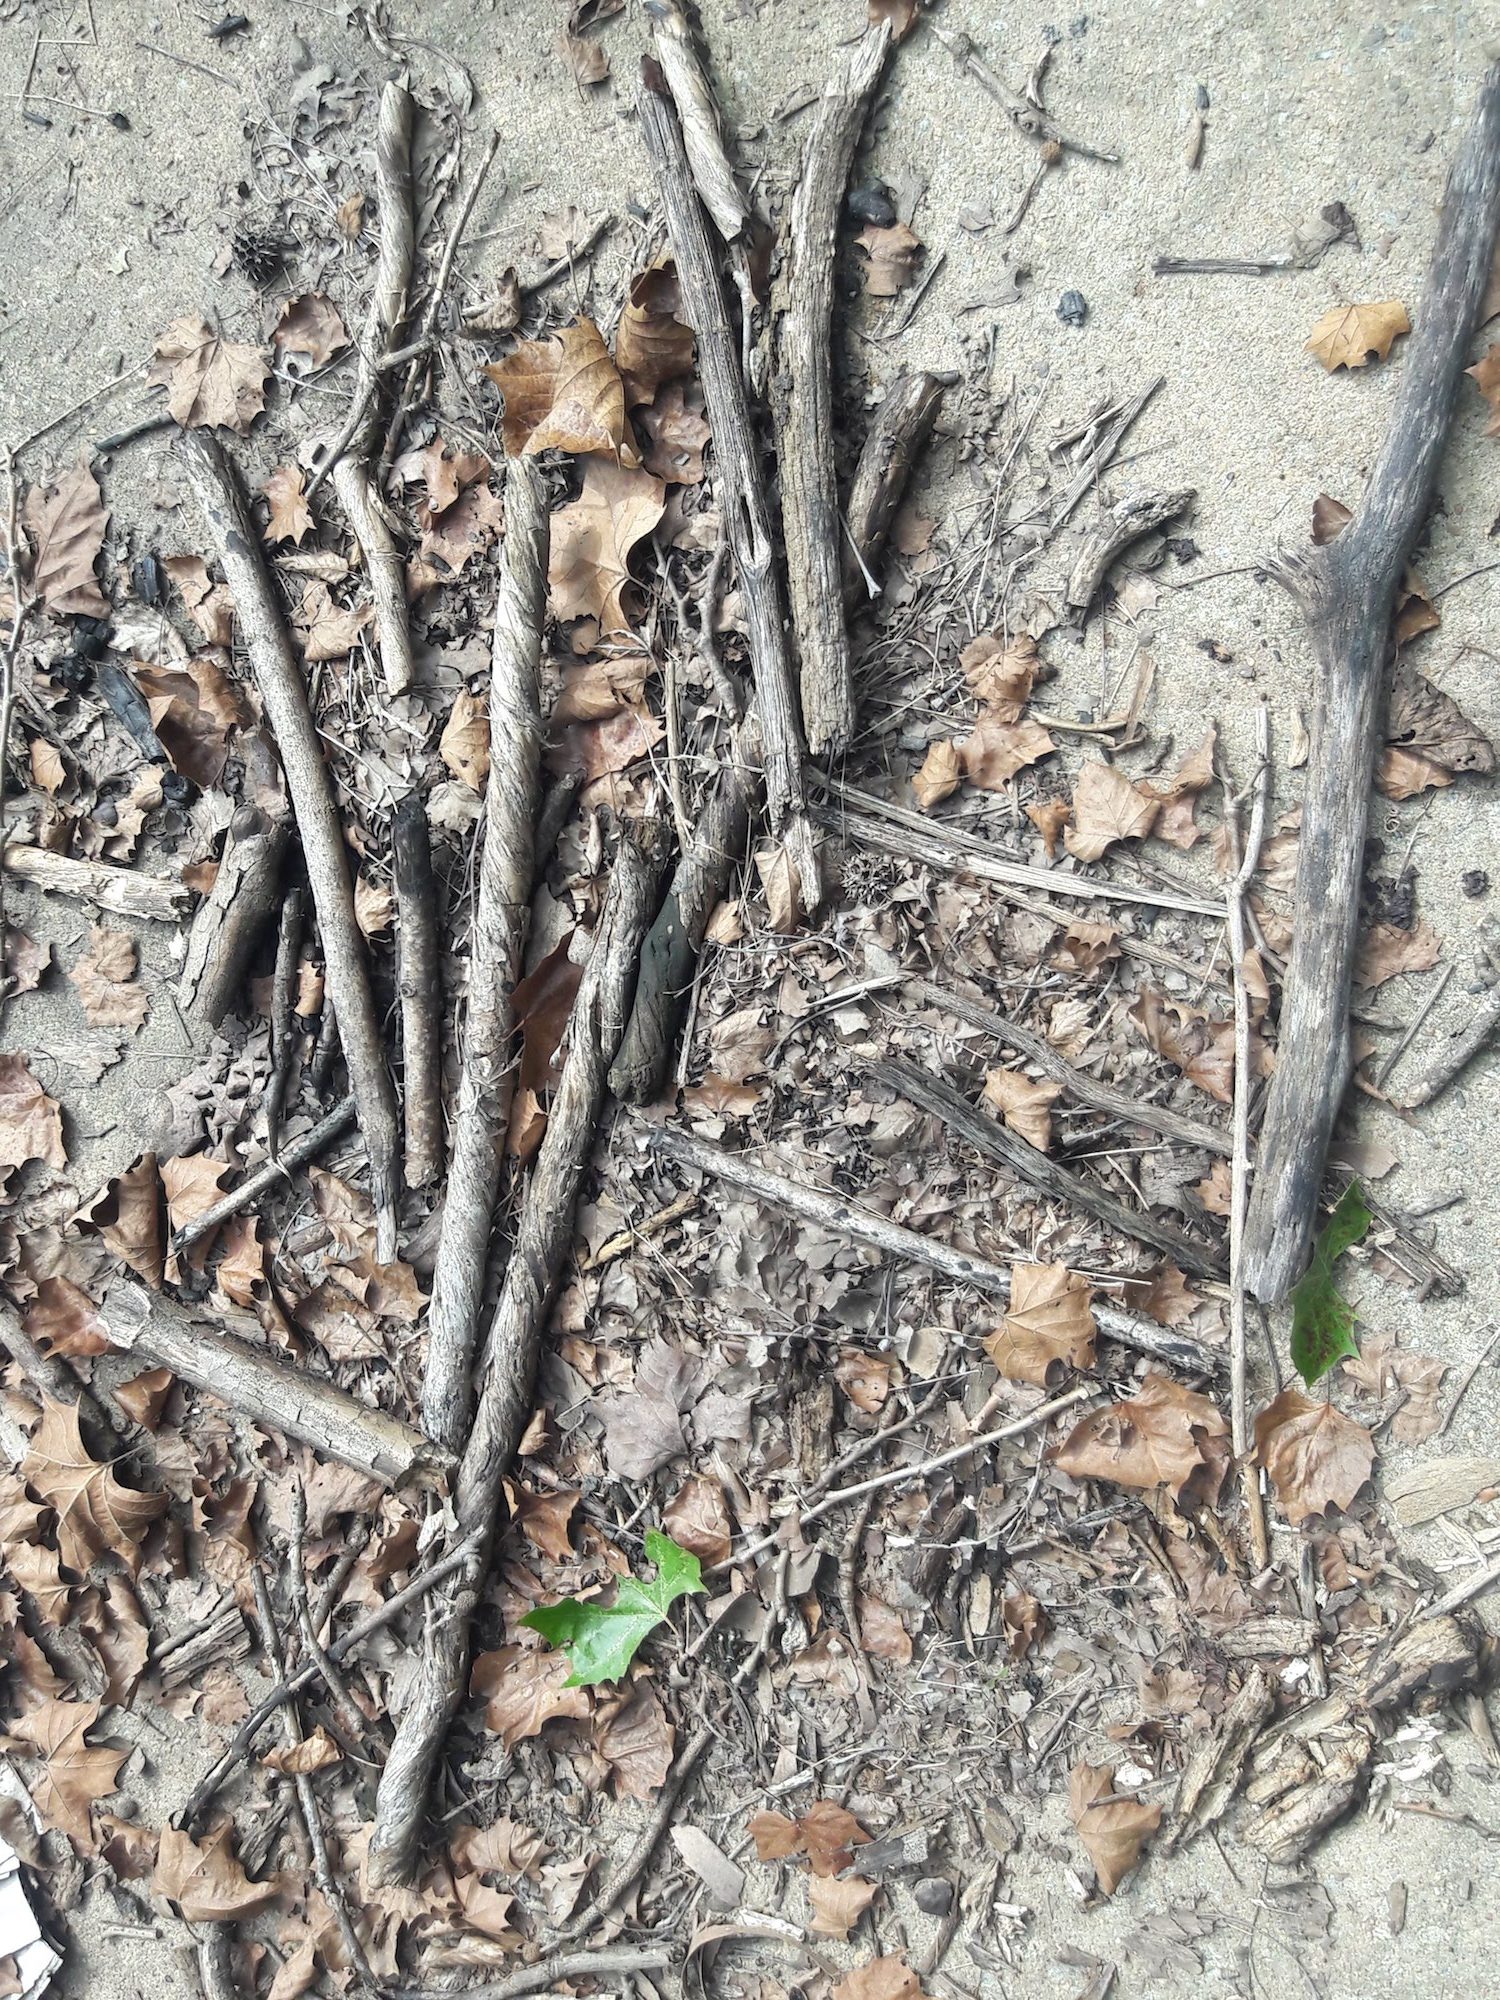 sticks and leaves on the ground